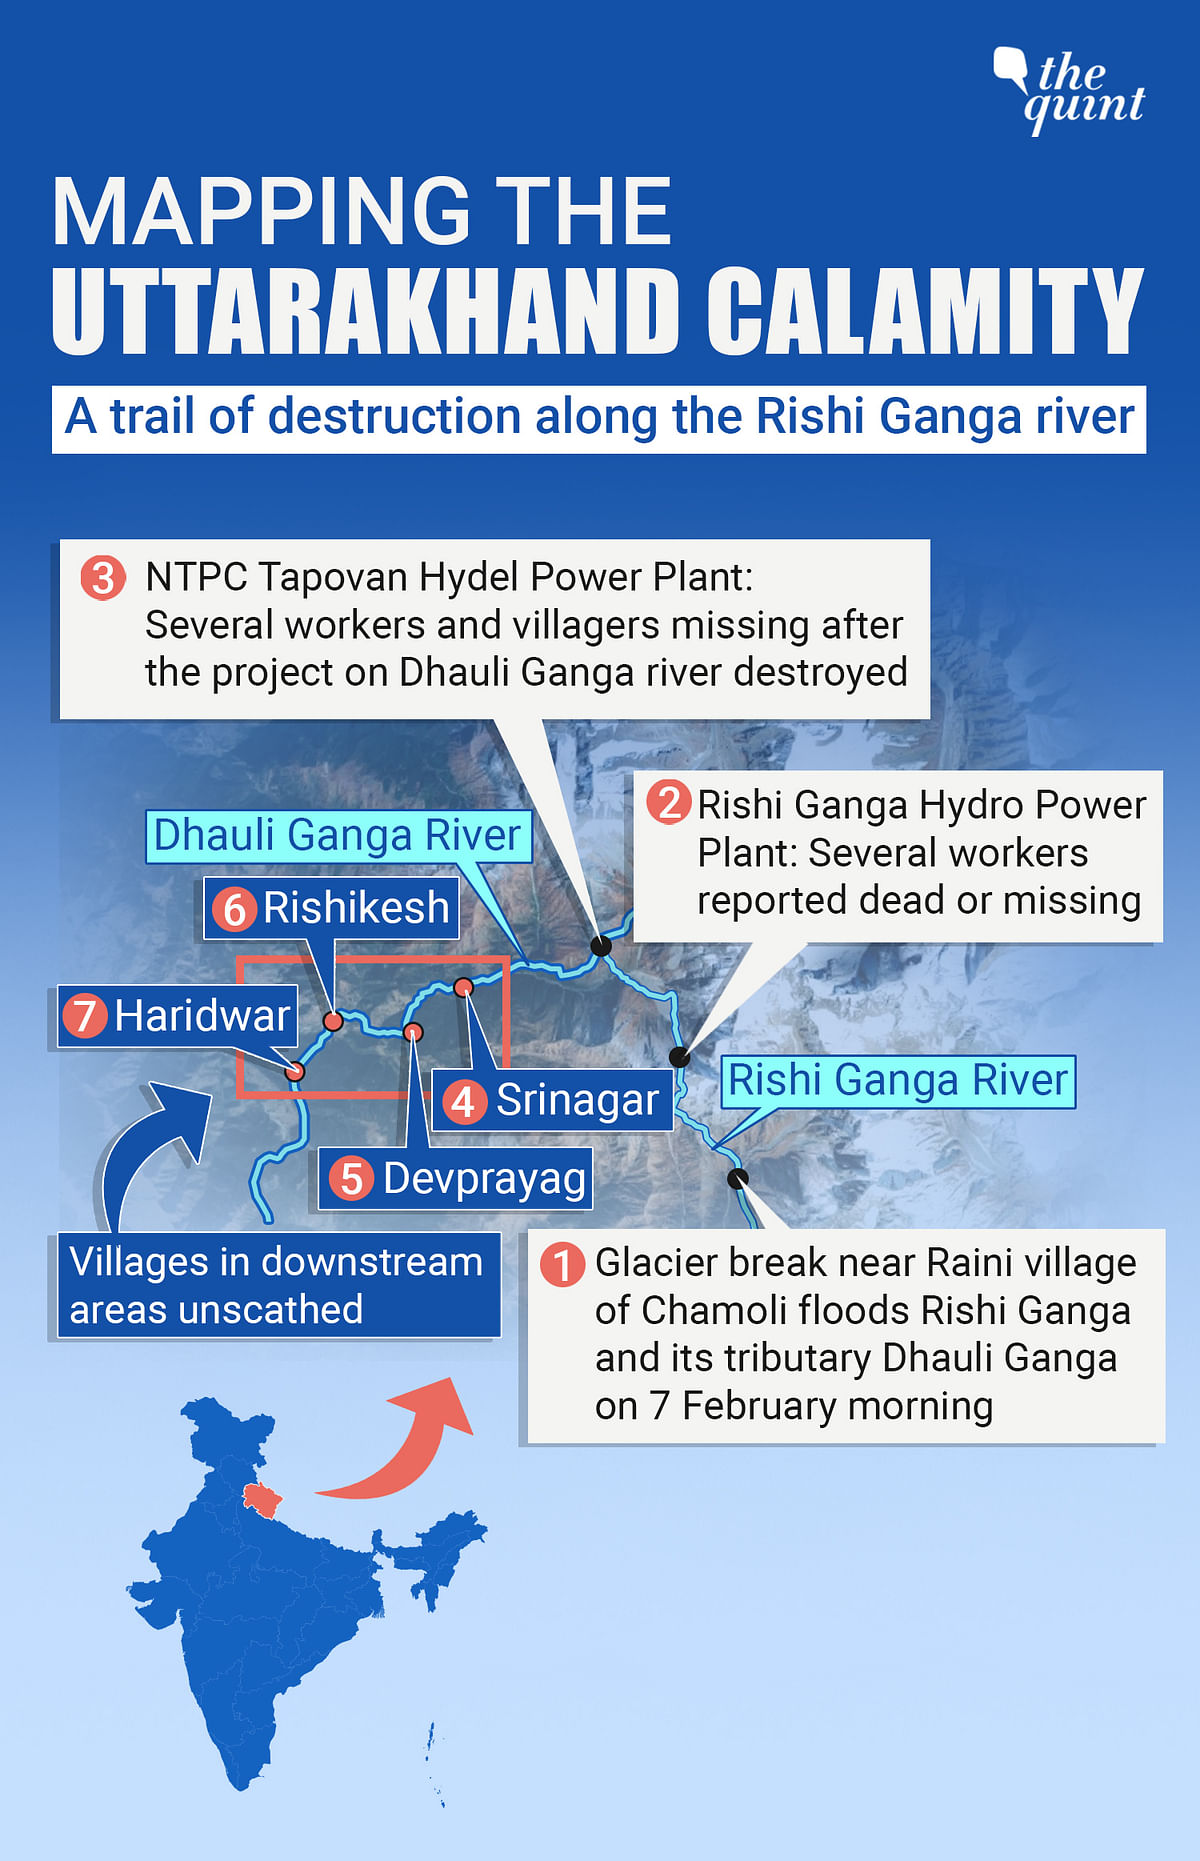 Here is a map tracing the destruction caused due to the Chamoli tragedy.